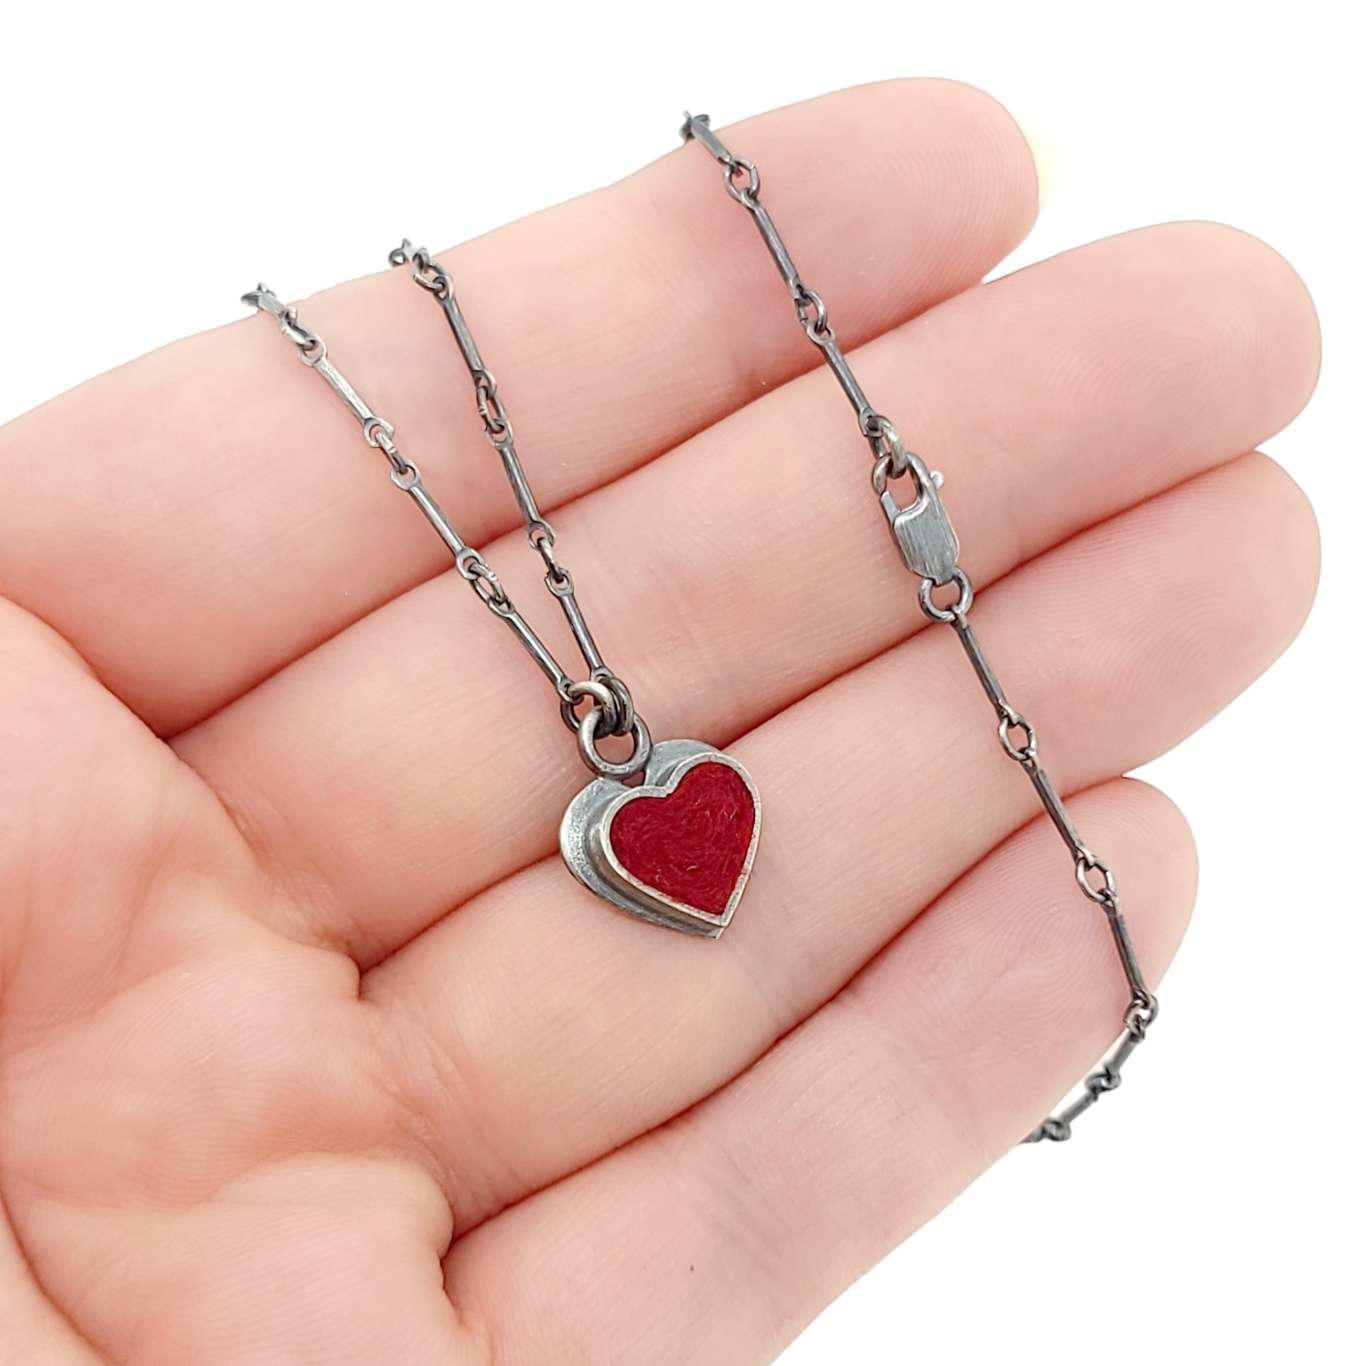 Necklace - Heart in Cranberry Red by Michele A. Friedman